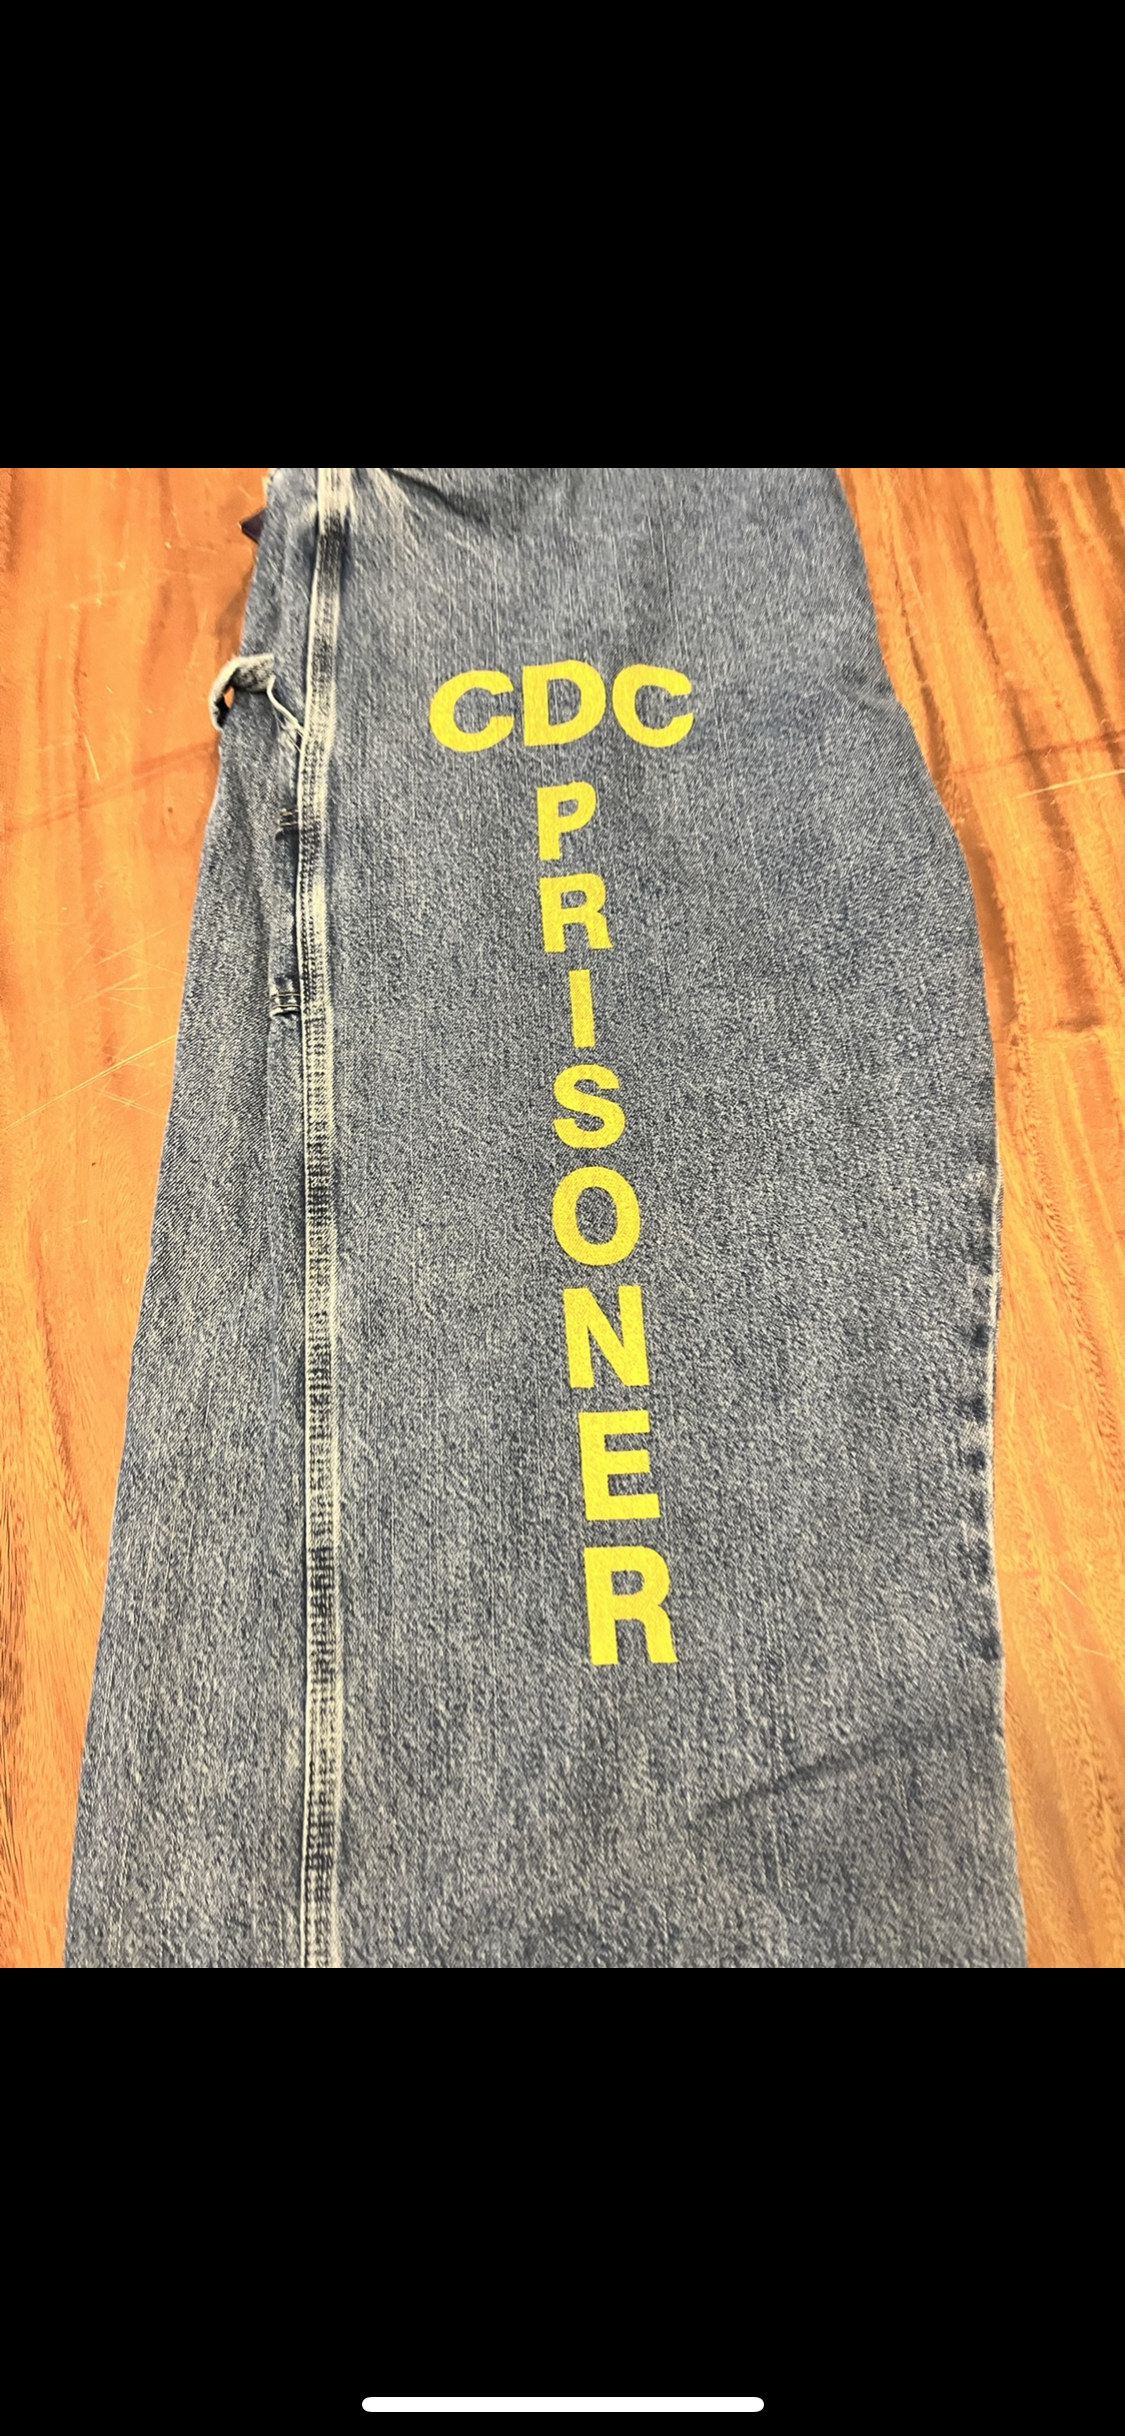 Sons Of Anarchy: Dickies Jeans with CDC Prisoner Printed on Leg